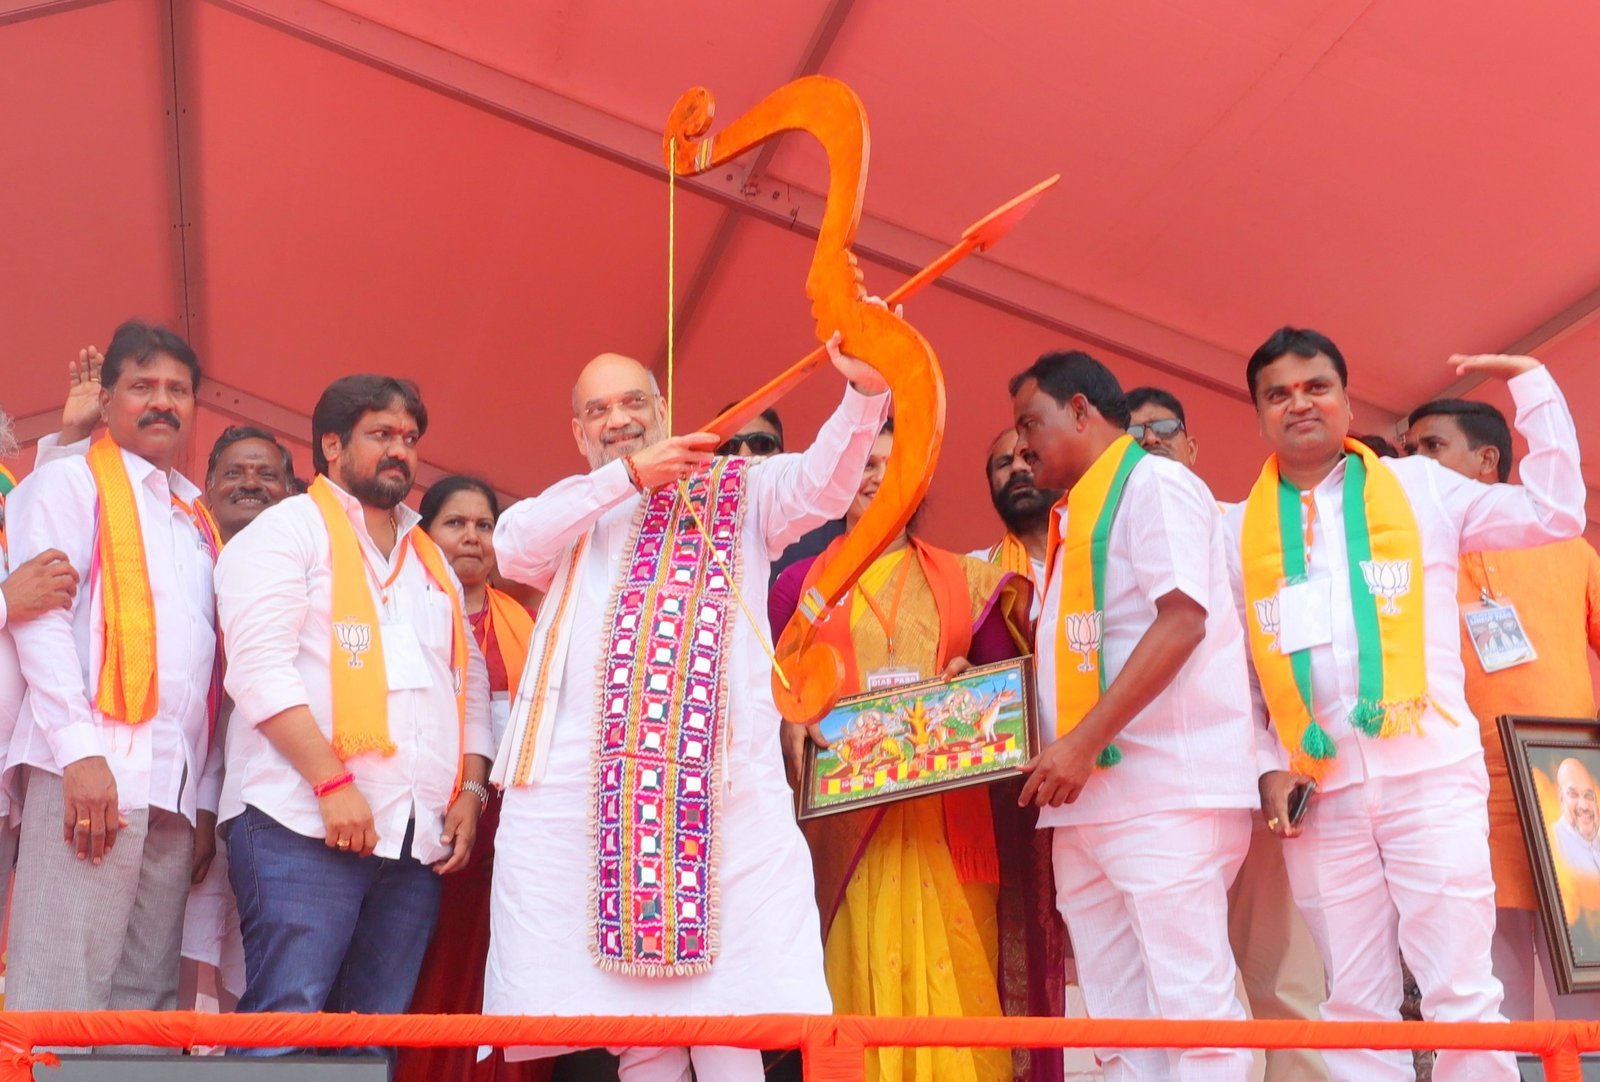 Grih Saundarya | Dreams Dashed KCR Government Withholds Scholarships for Tribal Youth - Amit Shah